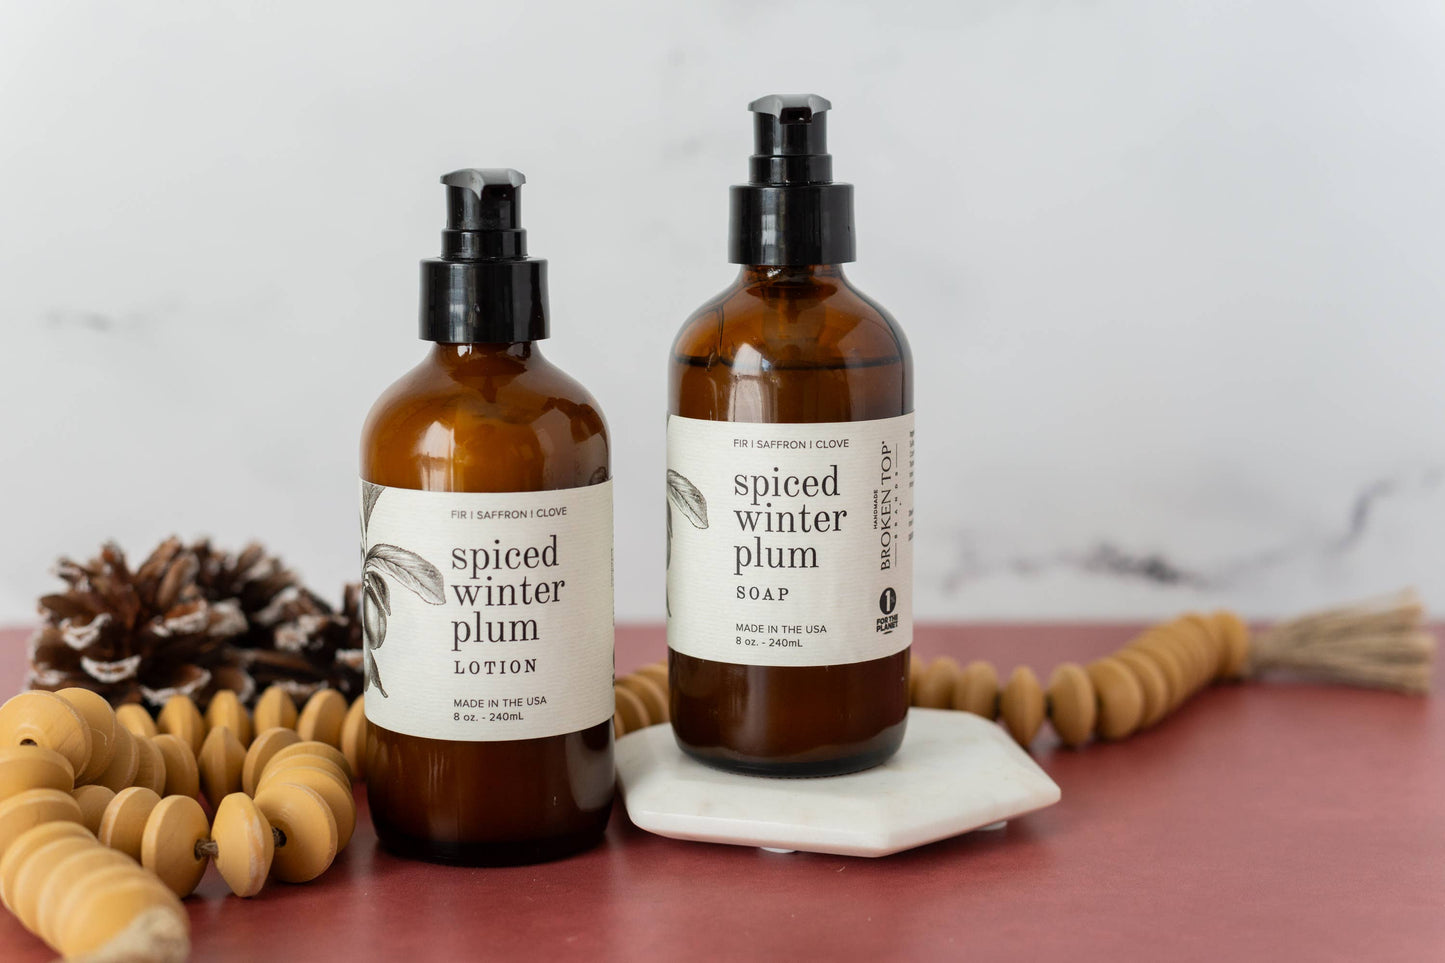 Lotion - Spiced Winter Plum